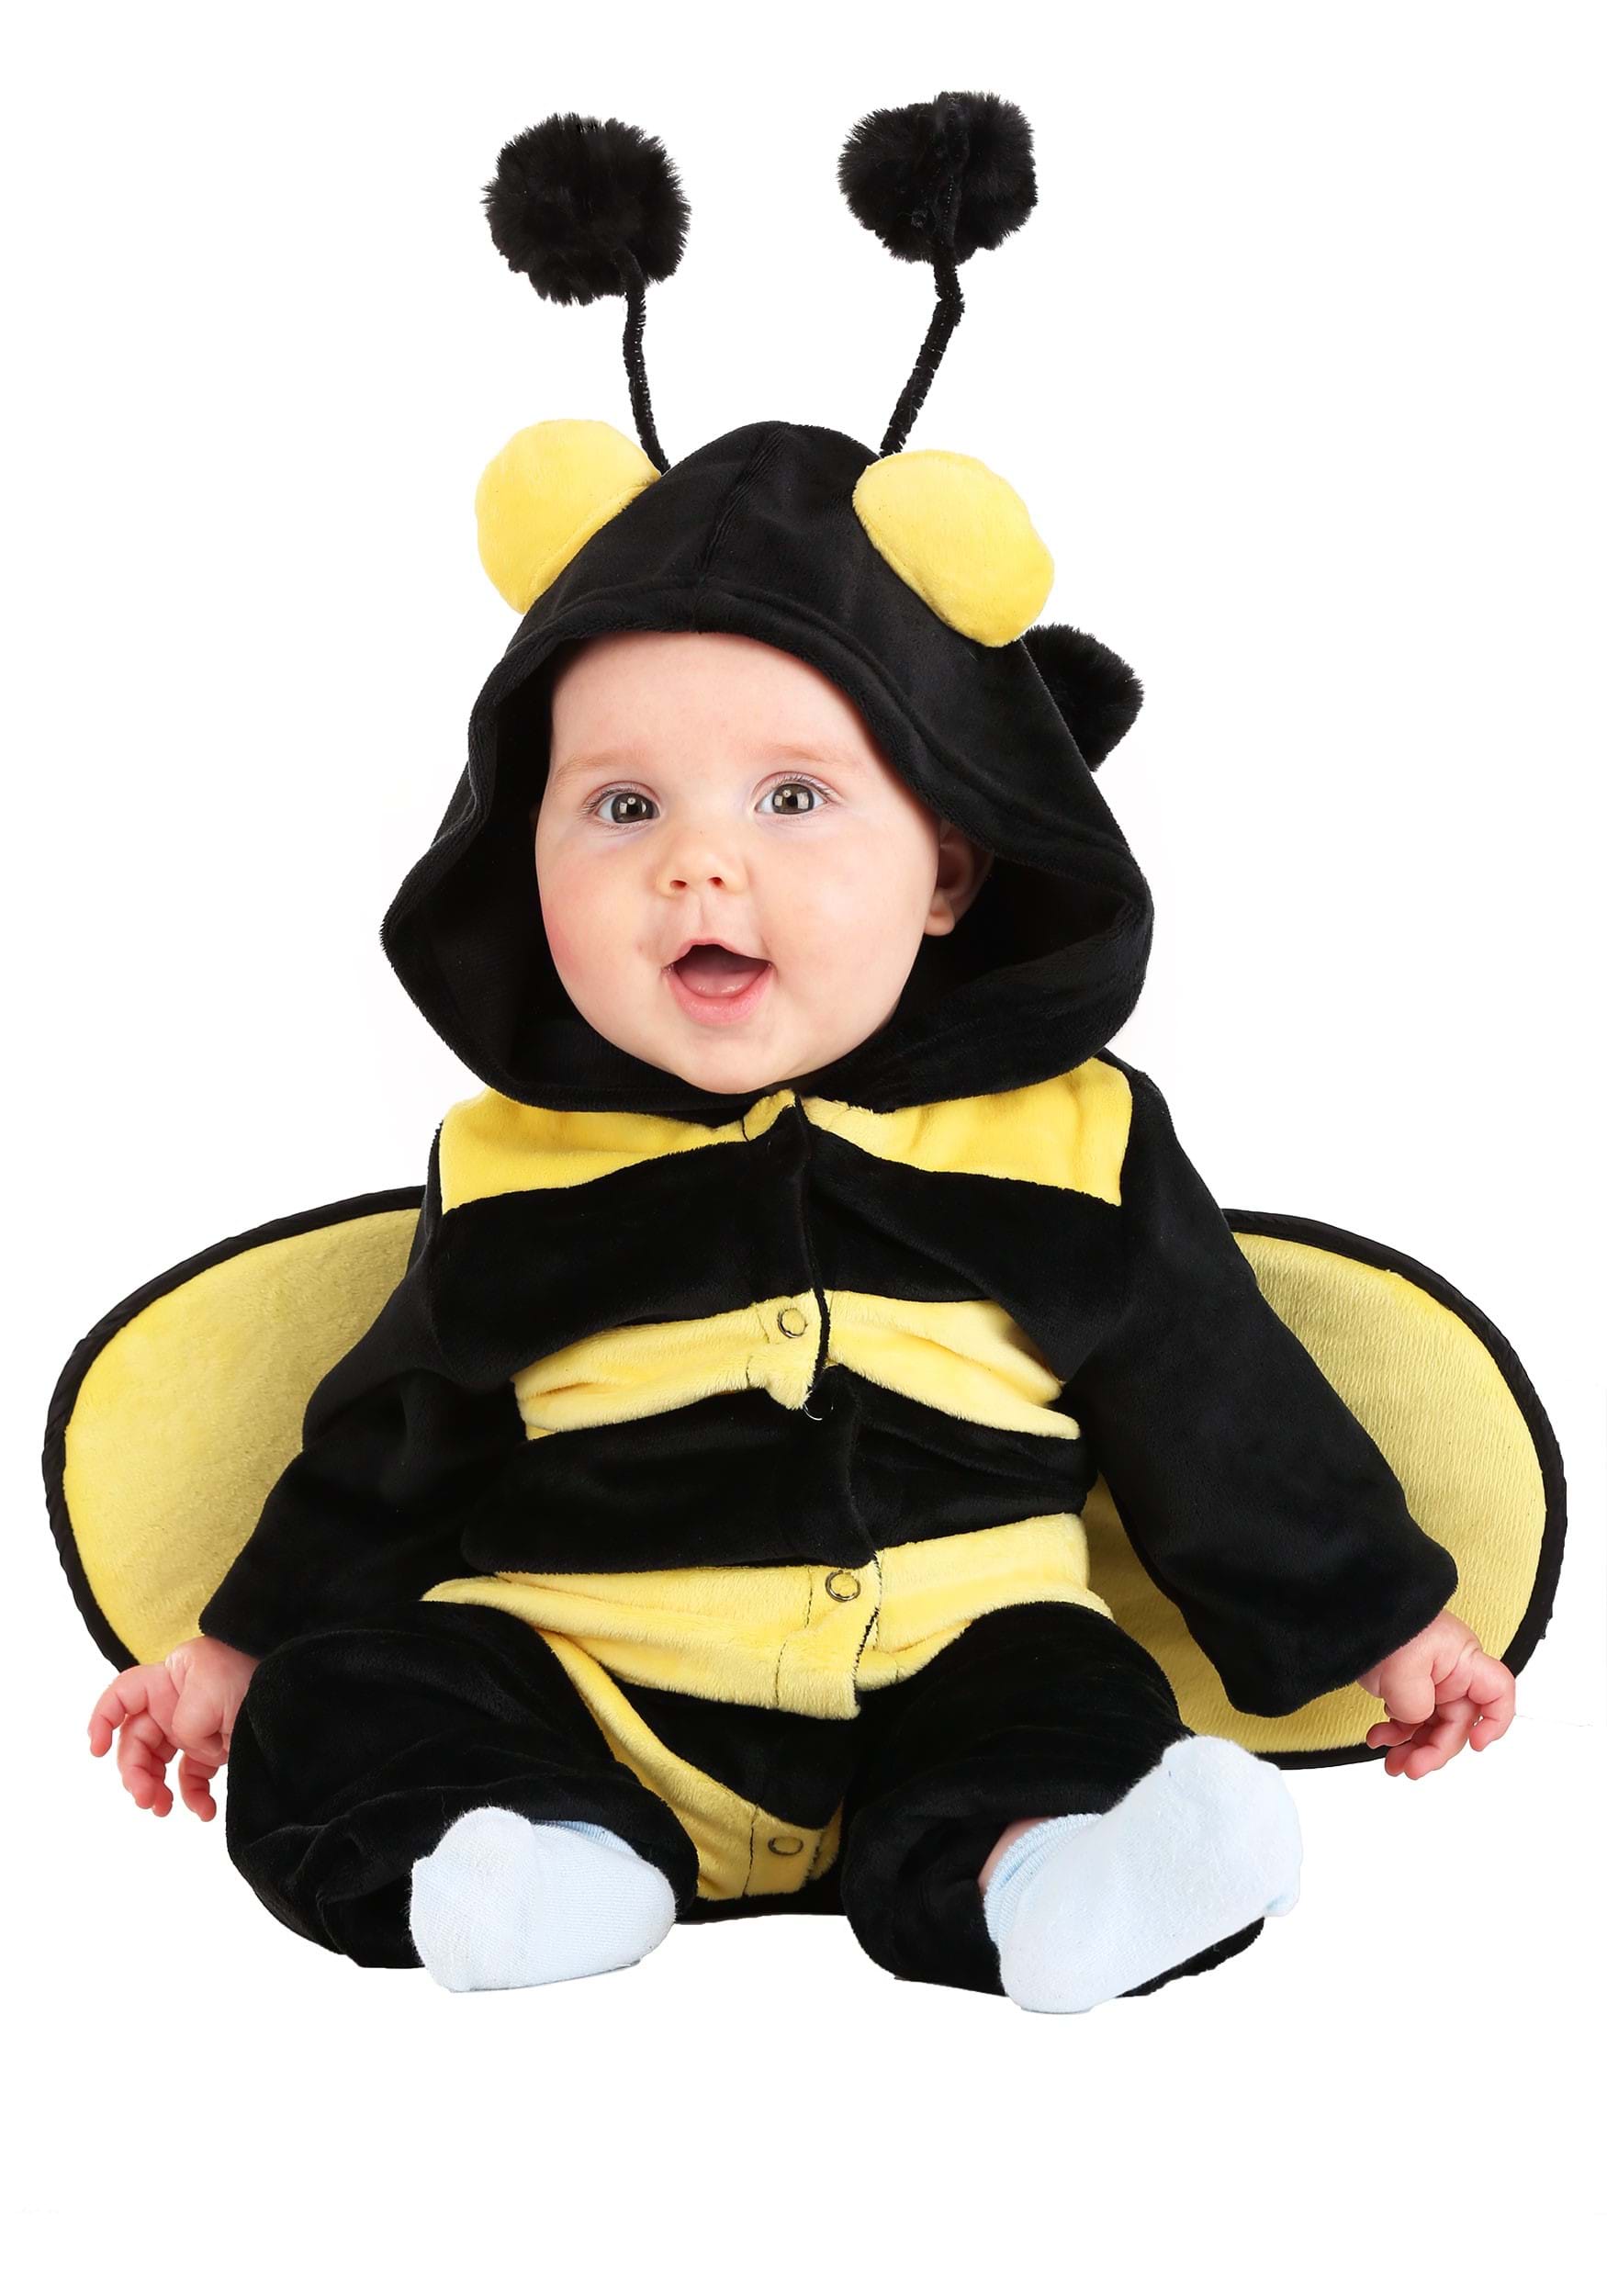 Buzzing Bumble Bee Costume For Infant's